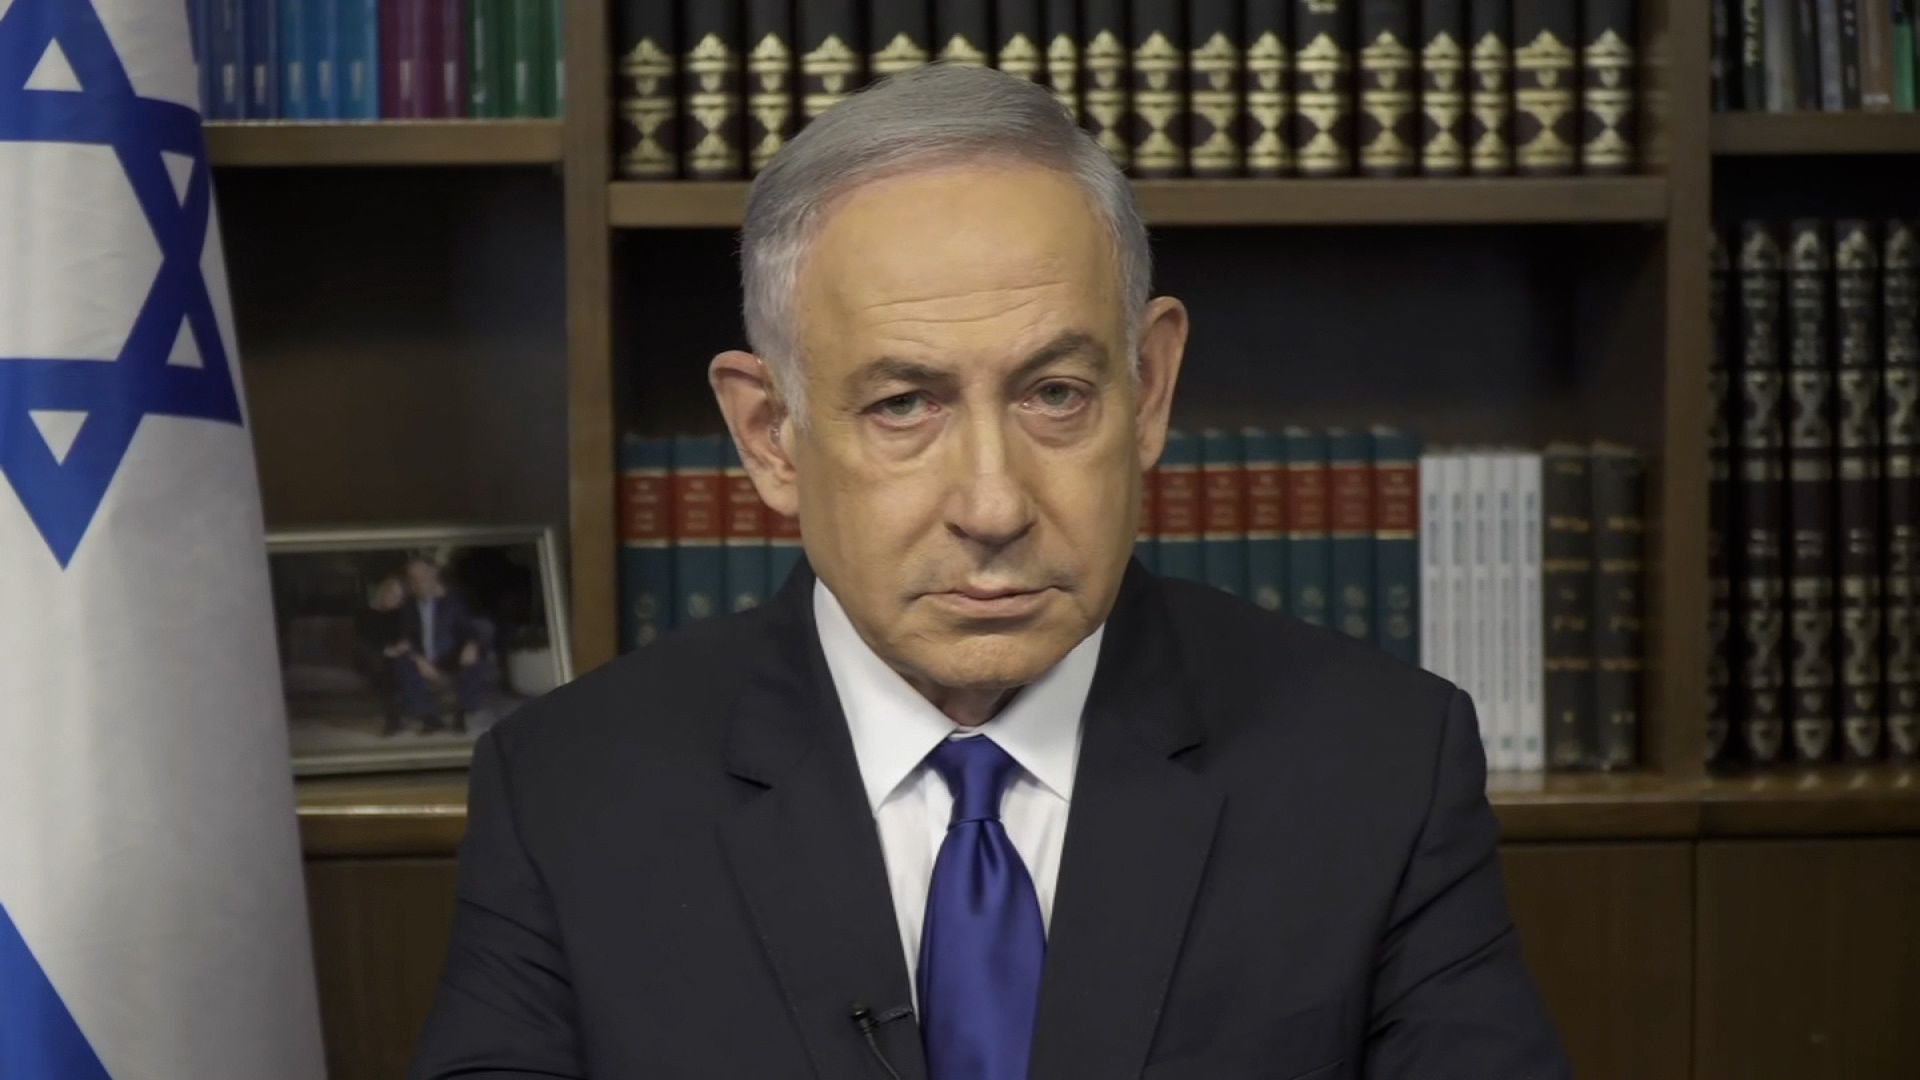 Israeli Prime Minister Benjamin Netanyahu during a CNN interview on March 17.